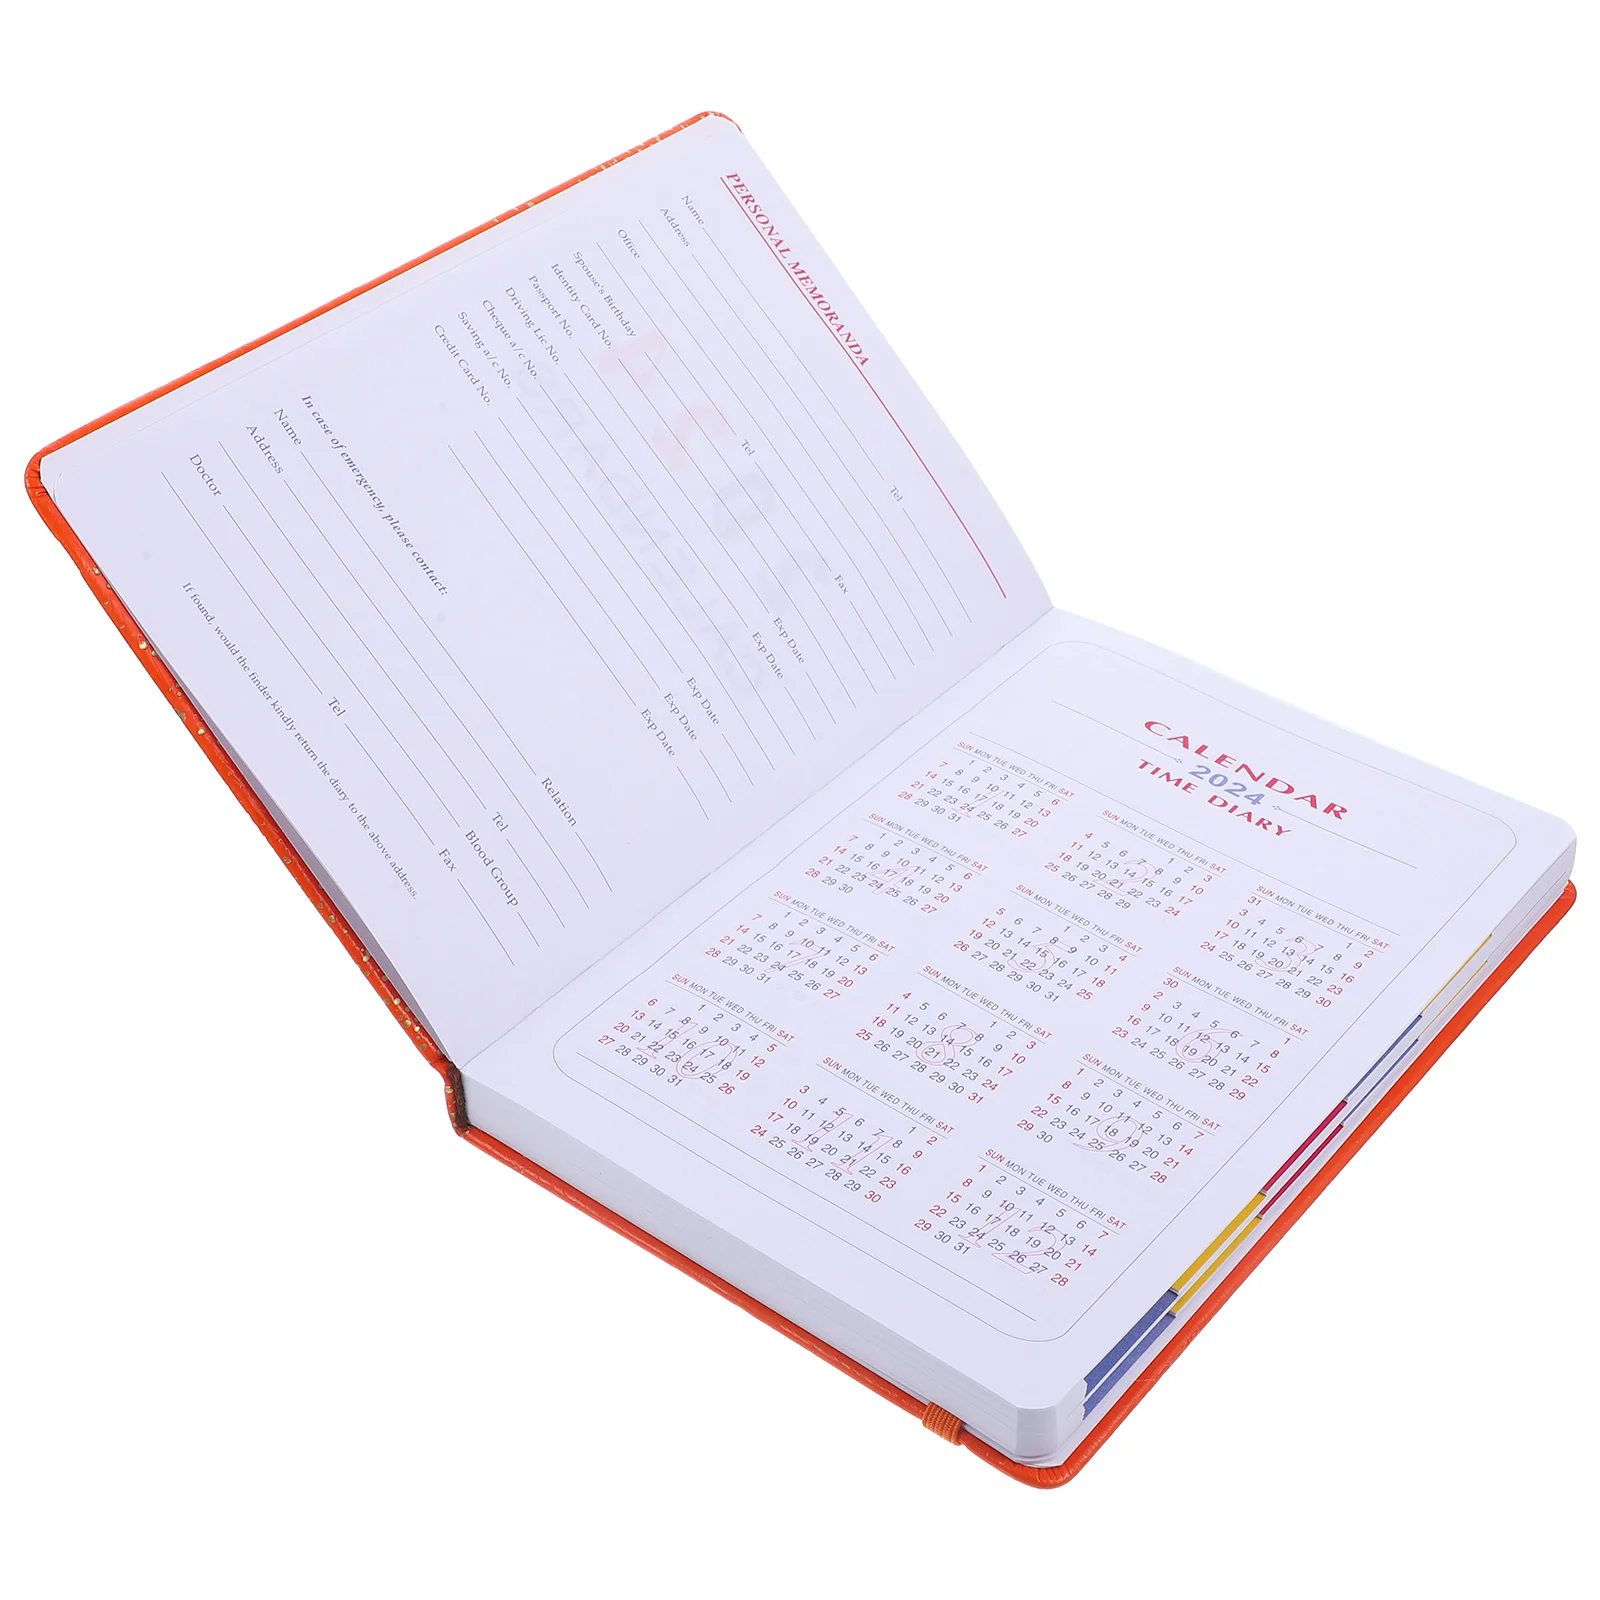 

The Notebook Date Notepad Weekly Plan Pad Efficient Planner Schedule Notepad For Students School Office